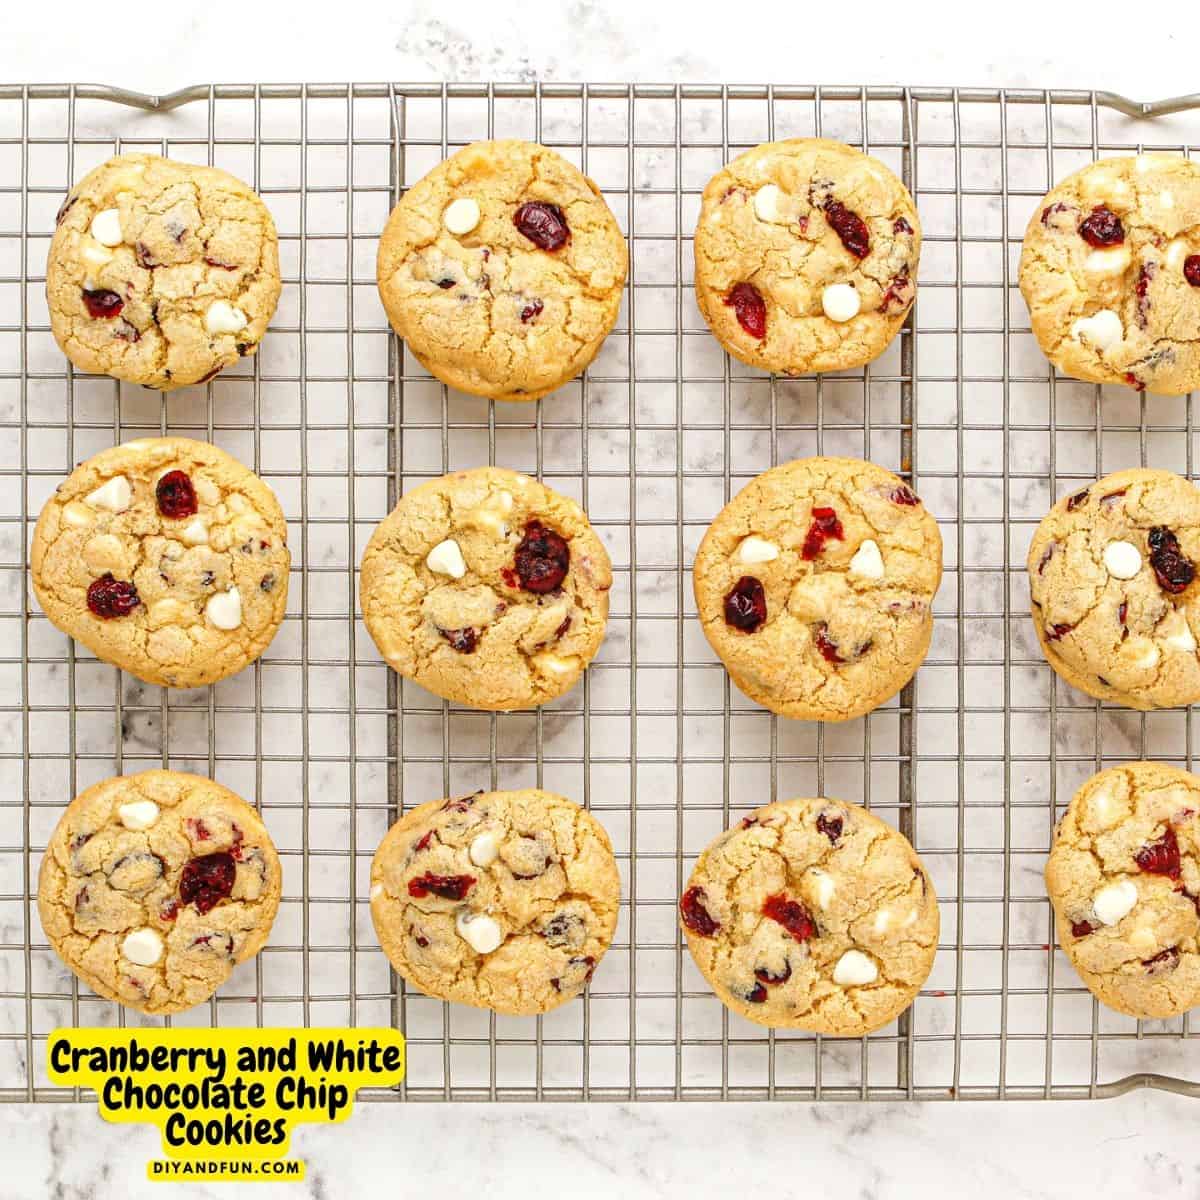 Cranberry and White Chocolate Chip Cookies, a delicious dessert or snack recipe made with real cranberries. Perfect holiday cookie idea! 